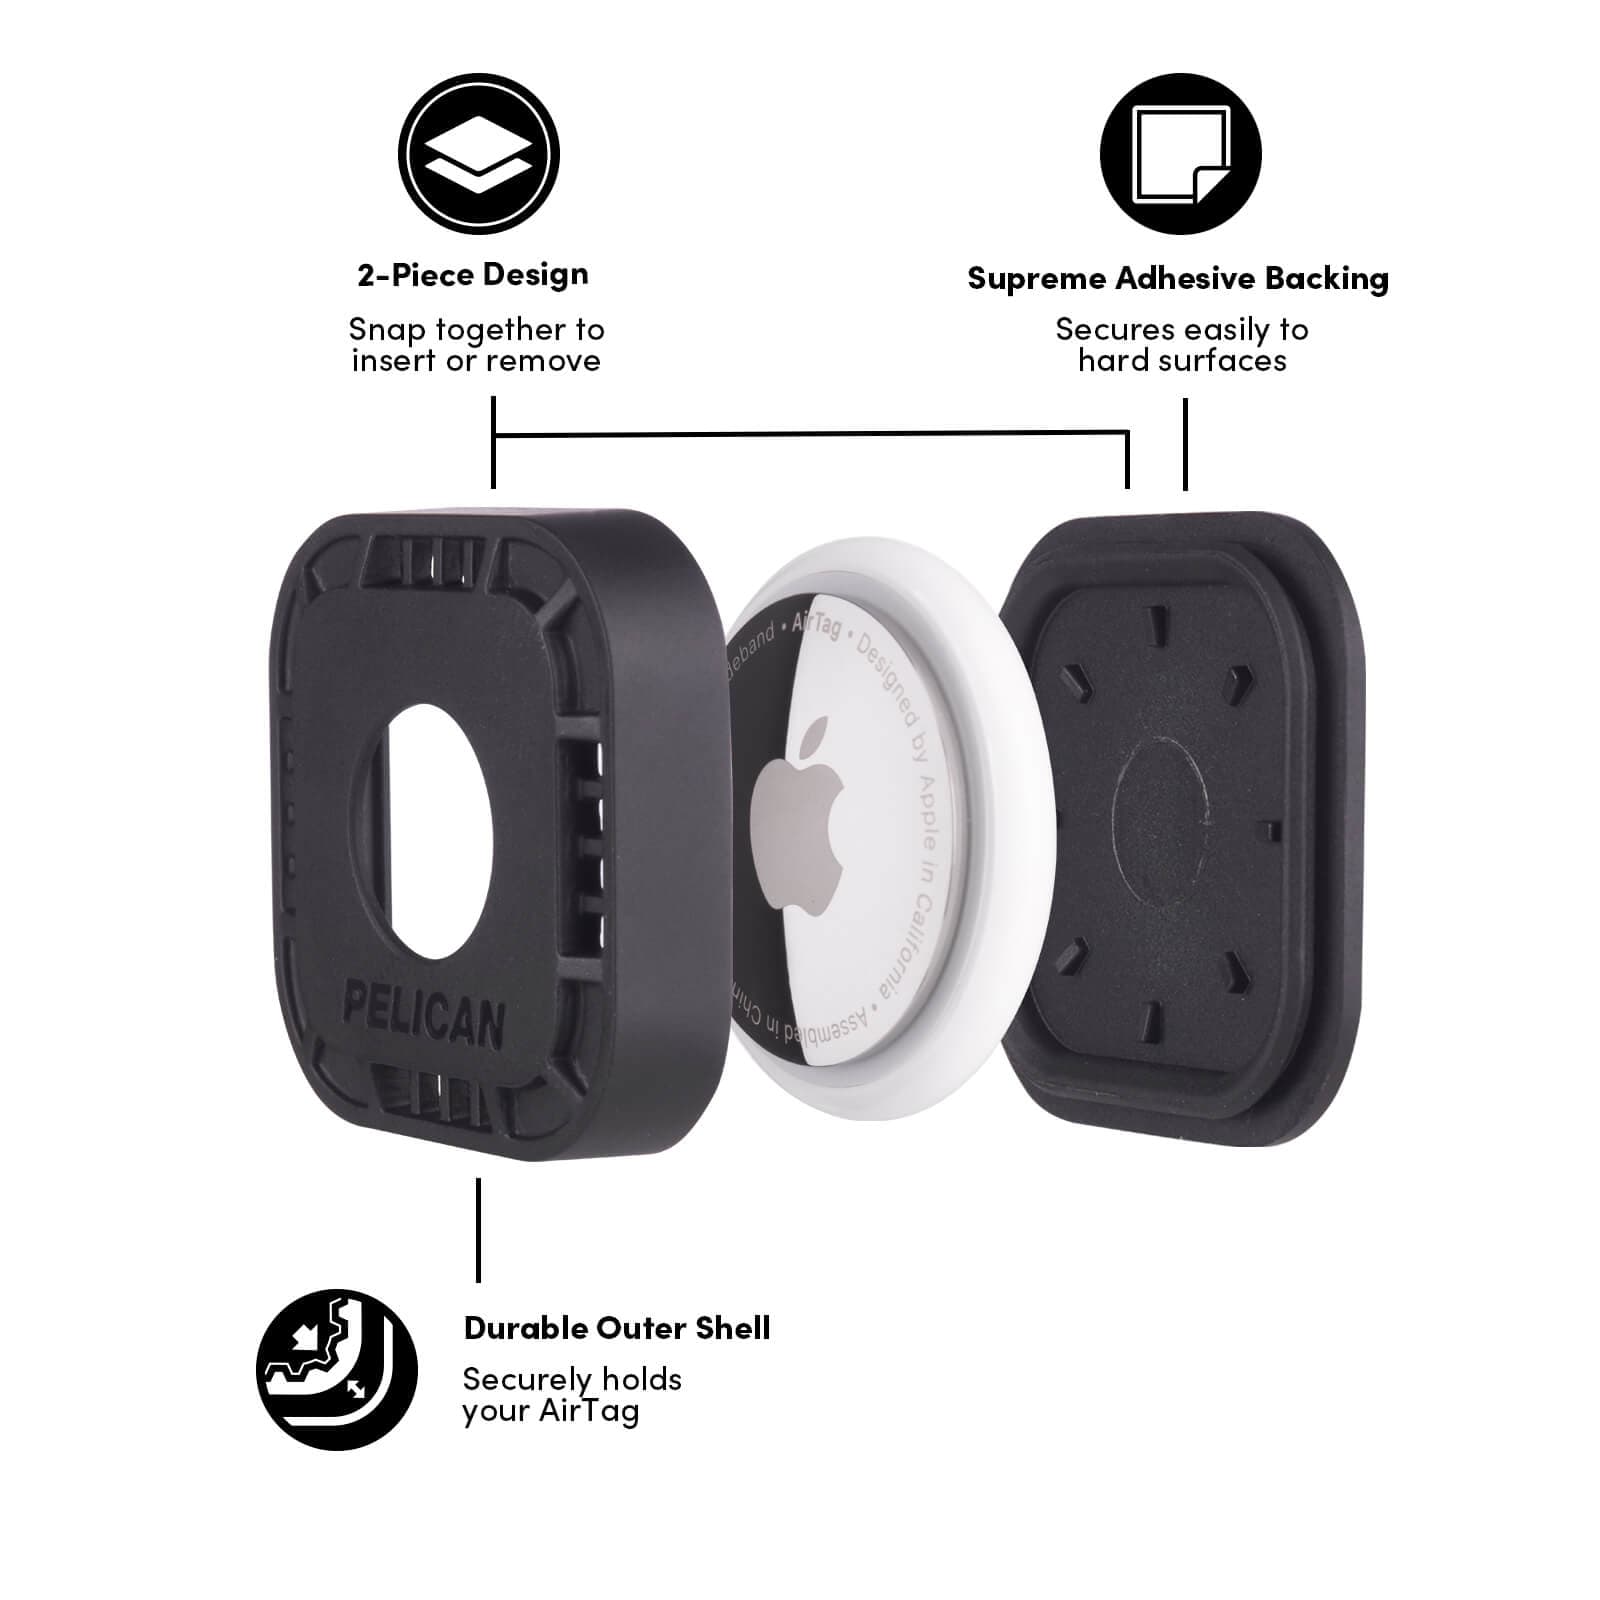 2 Piece Design. Snap together to insert or remove. Supreme Adhesive Backing. Secures easily to hard surfaces. Durable Outer Shell. Securely Holds your AirTag. color::Gray